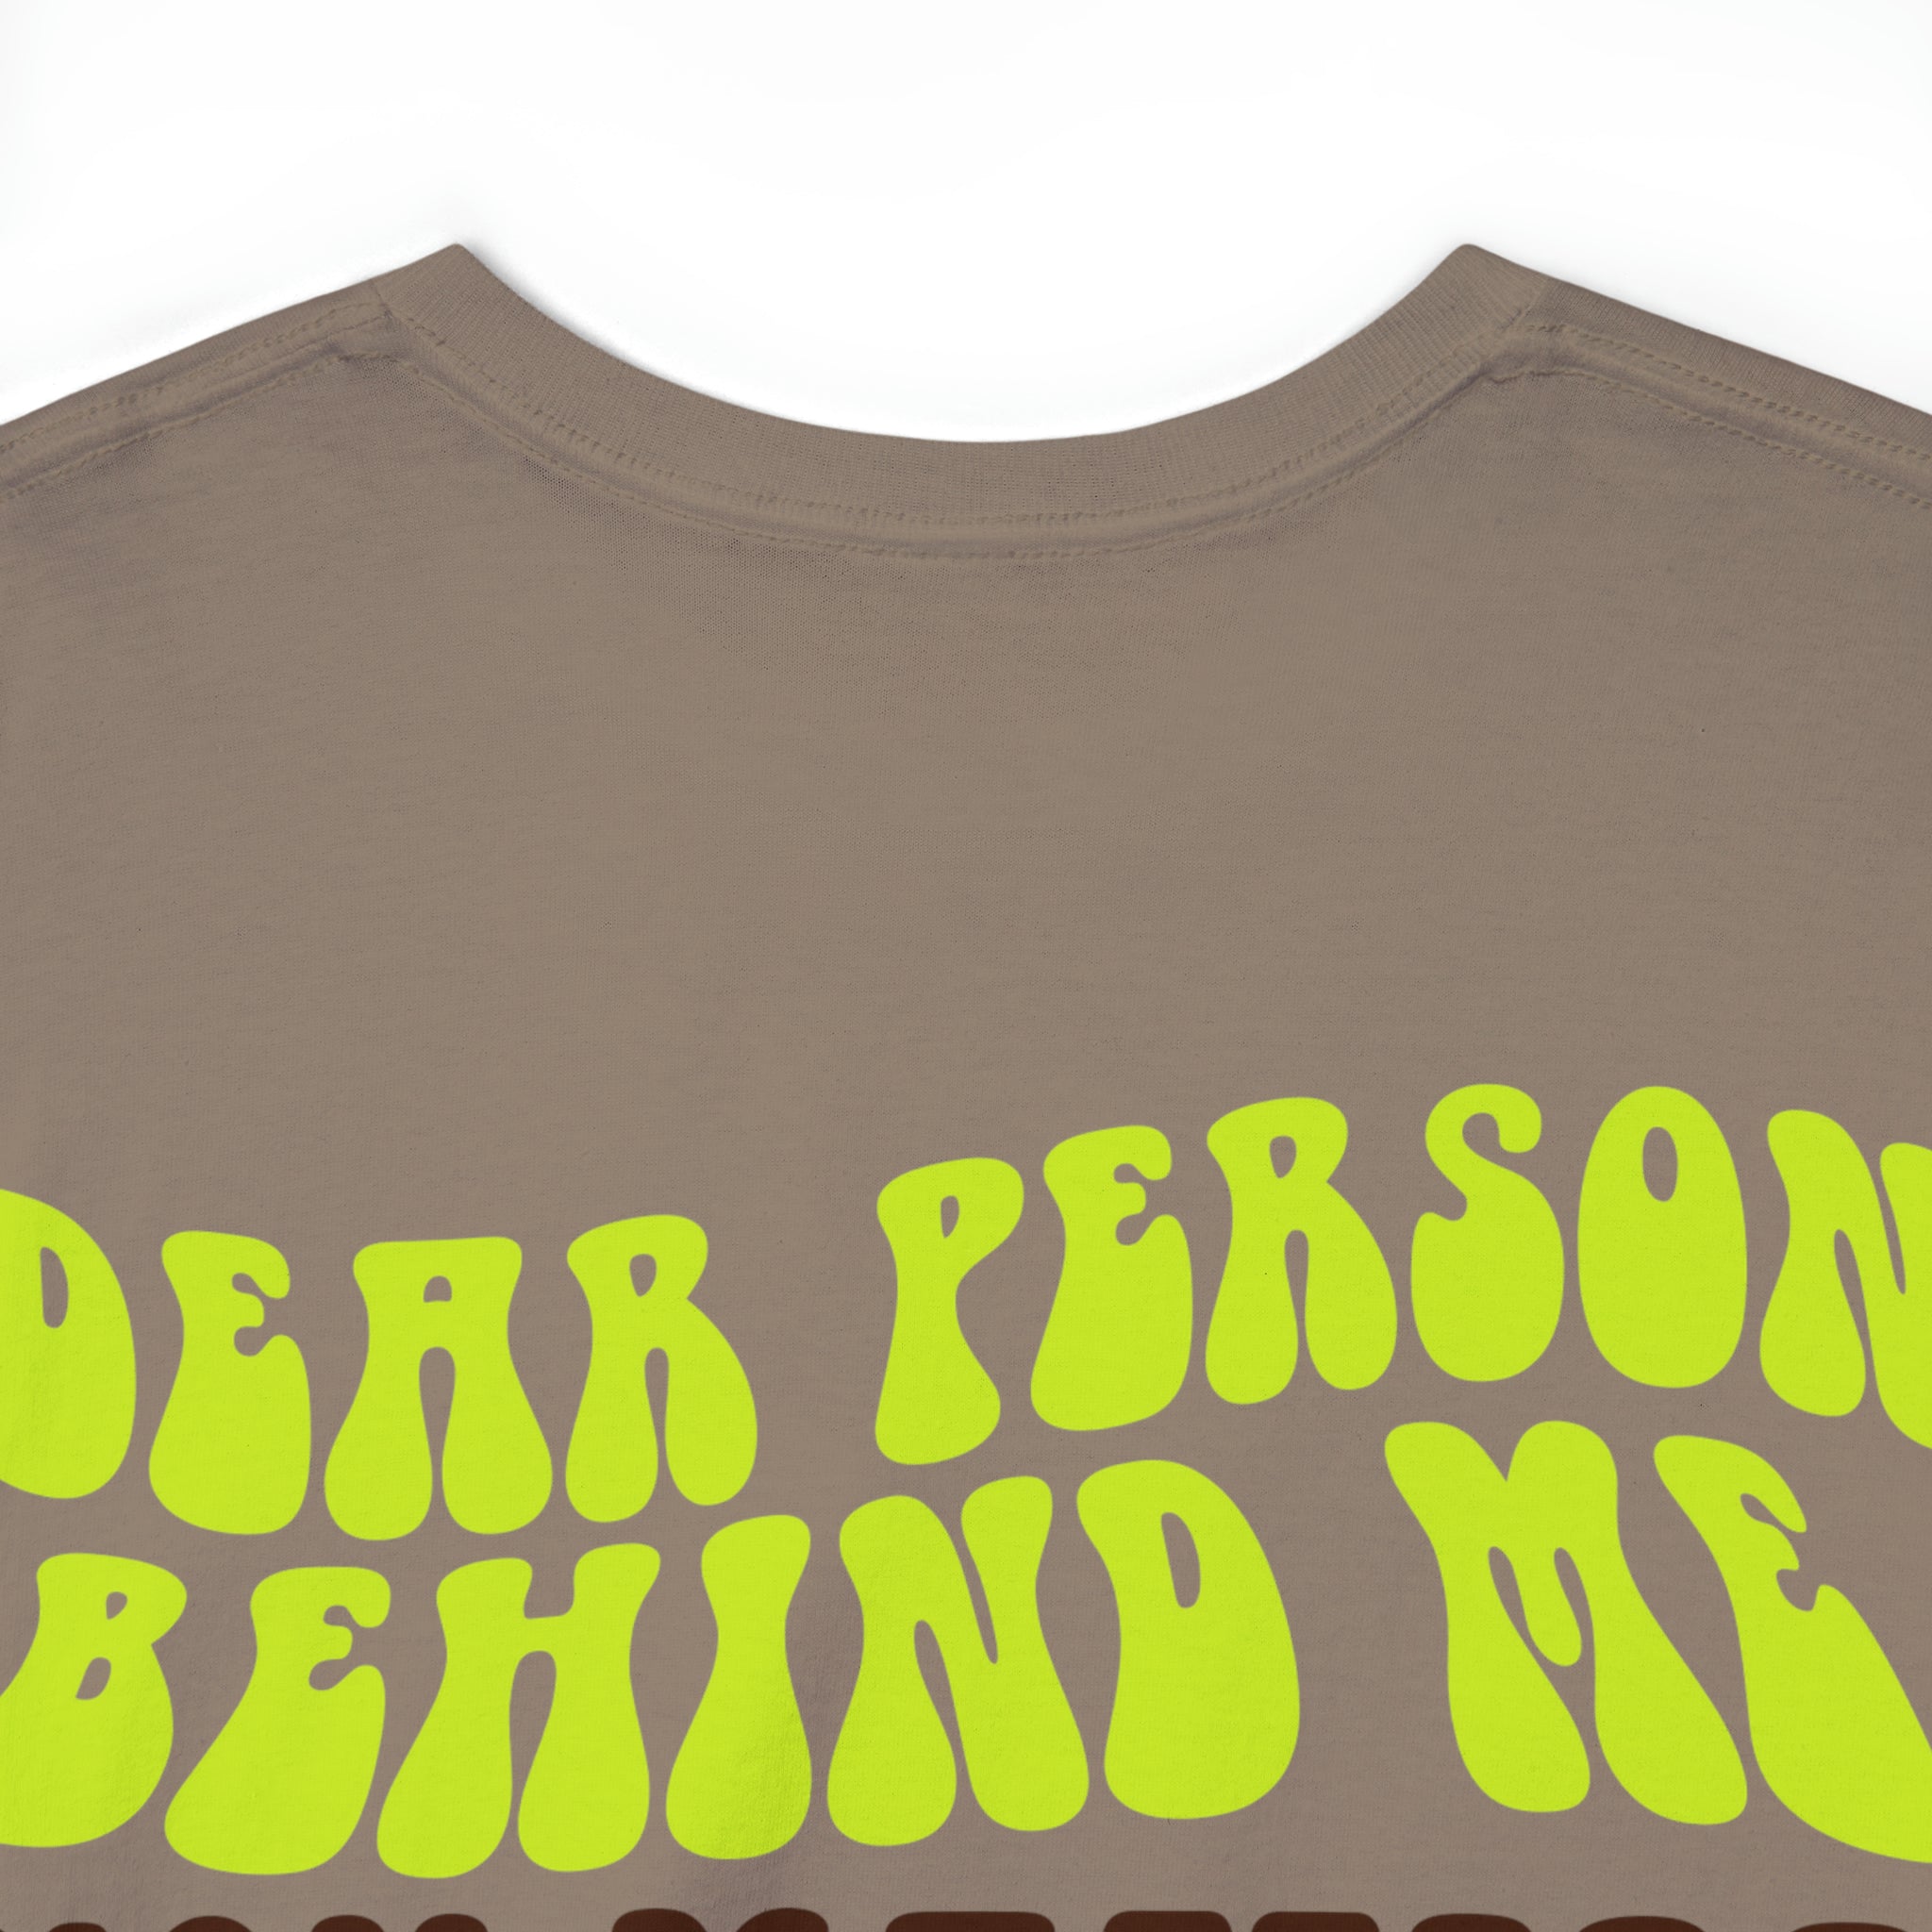 Dear Person Behind Me You Matter! T-Shirt Designed by Big Brain Brew